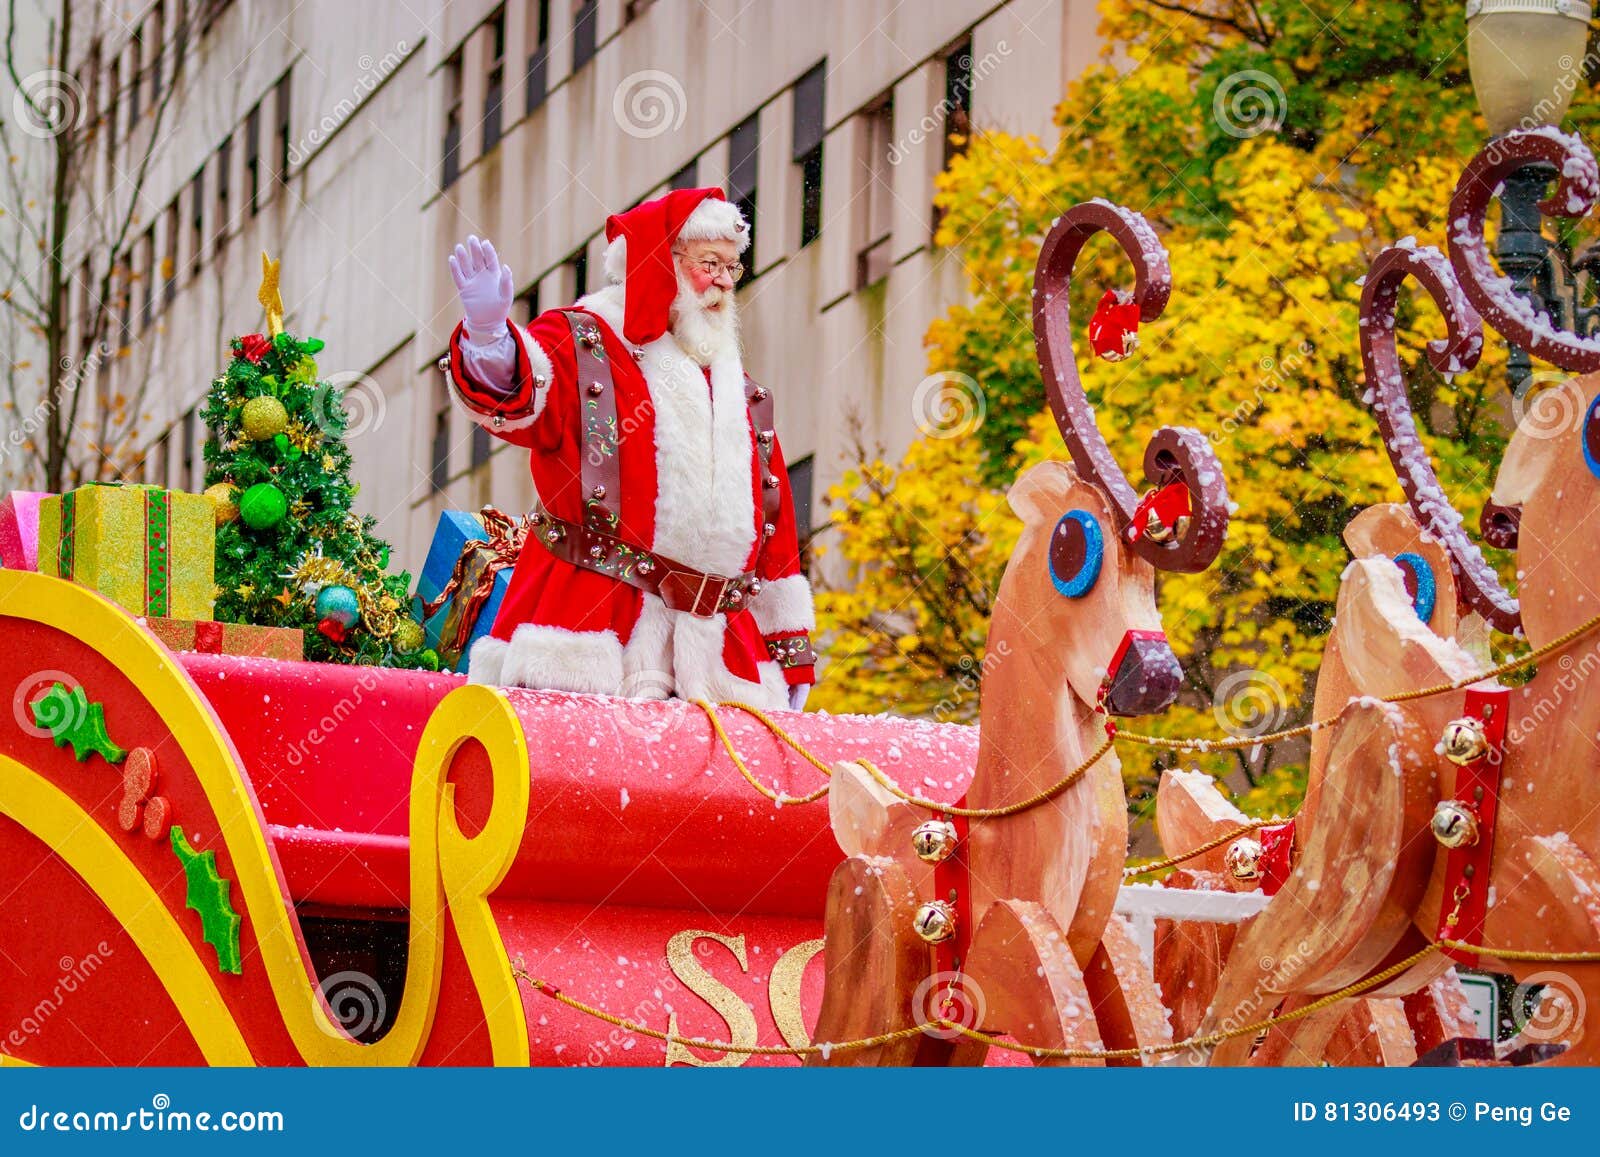 Thanksgiving Macy Parade 2016 Editorial Stock Photo - Image of blurred, urban: 81306493